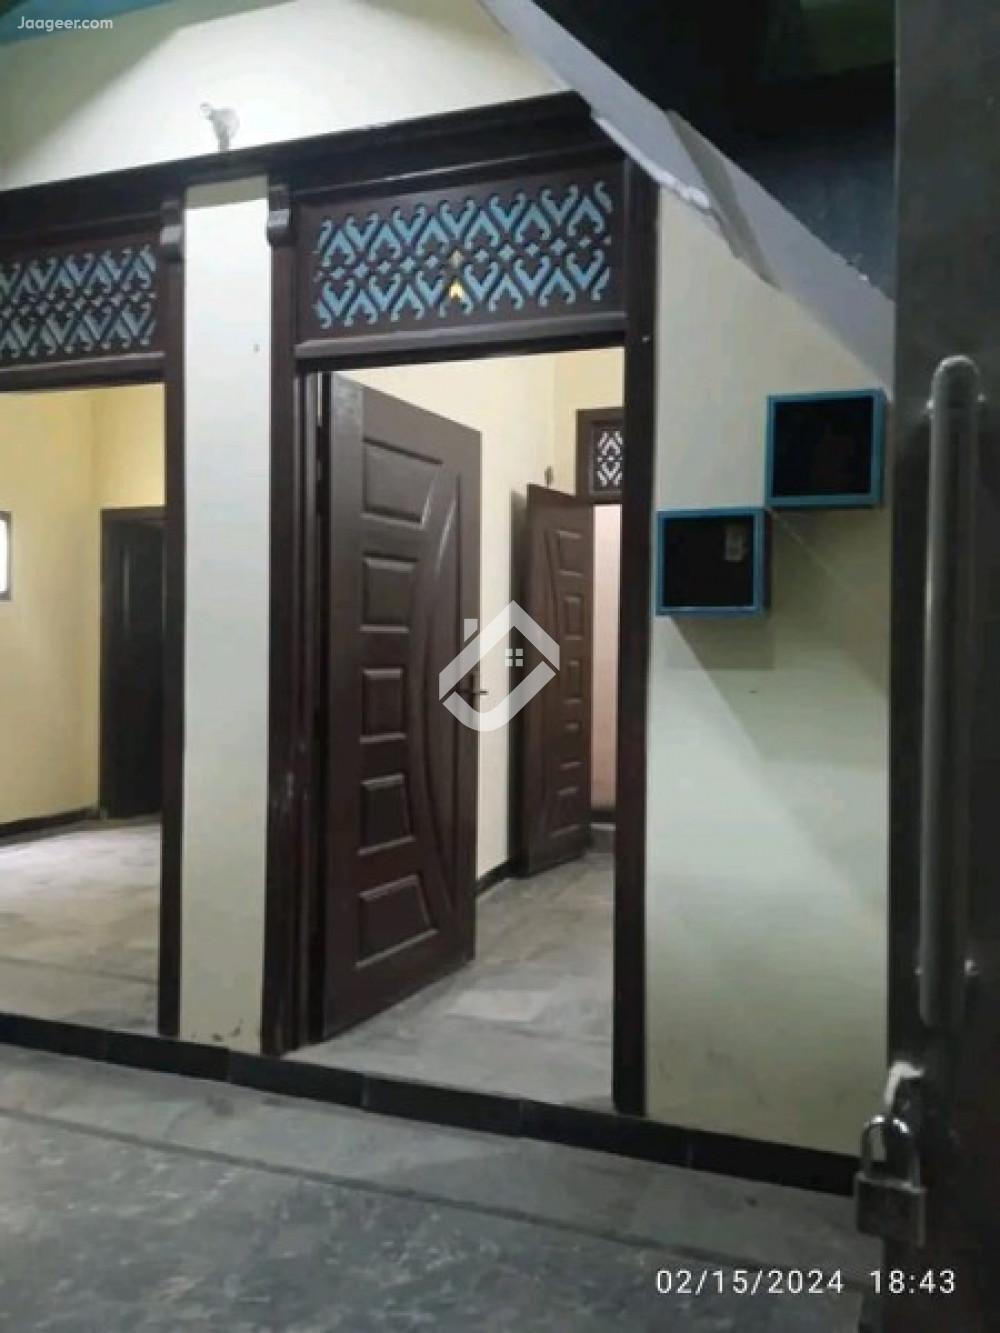 Main image 2 Marla House For Rent In Wakeel Colony Near Airport Housing Society  Wakeel Colony Near Airport Housing Society RawalpindiWakeel Colony Near Airport Housing Society Rawalpindi